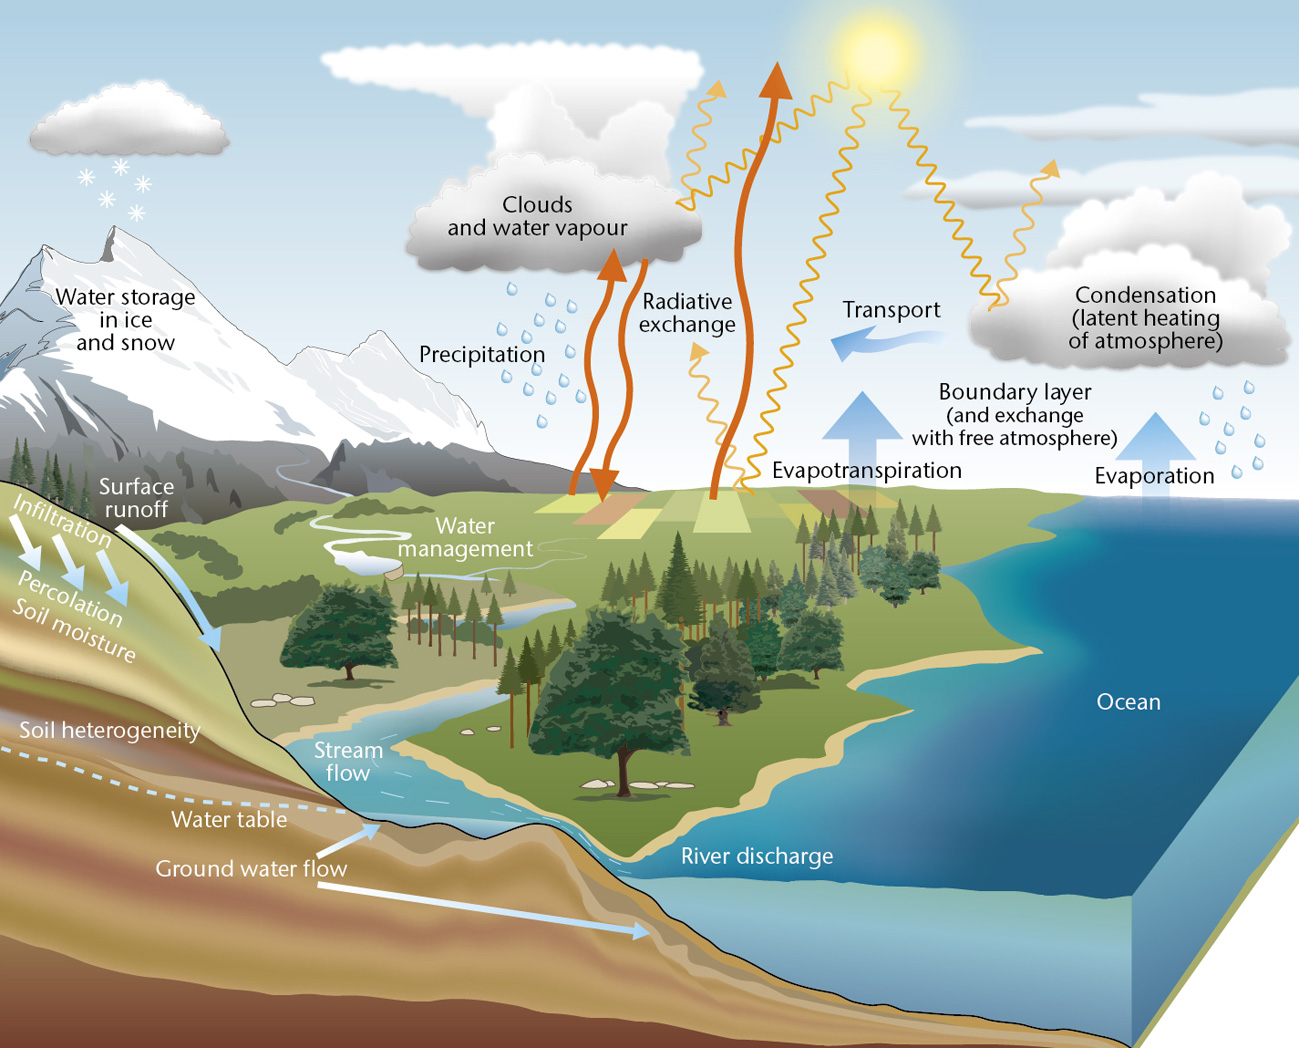 Illustration of the water cycle. Shows processes that transfer water between the surface and the atmosphere, such as: precipitation; evapotranspiration; evaporation; condensation; infiltration; percolation; and radiative exchange.